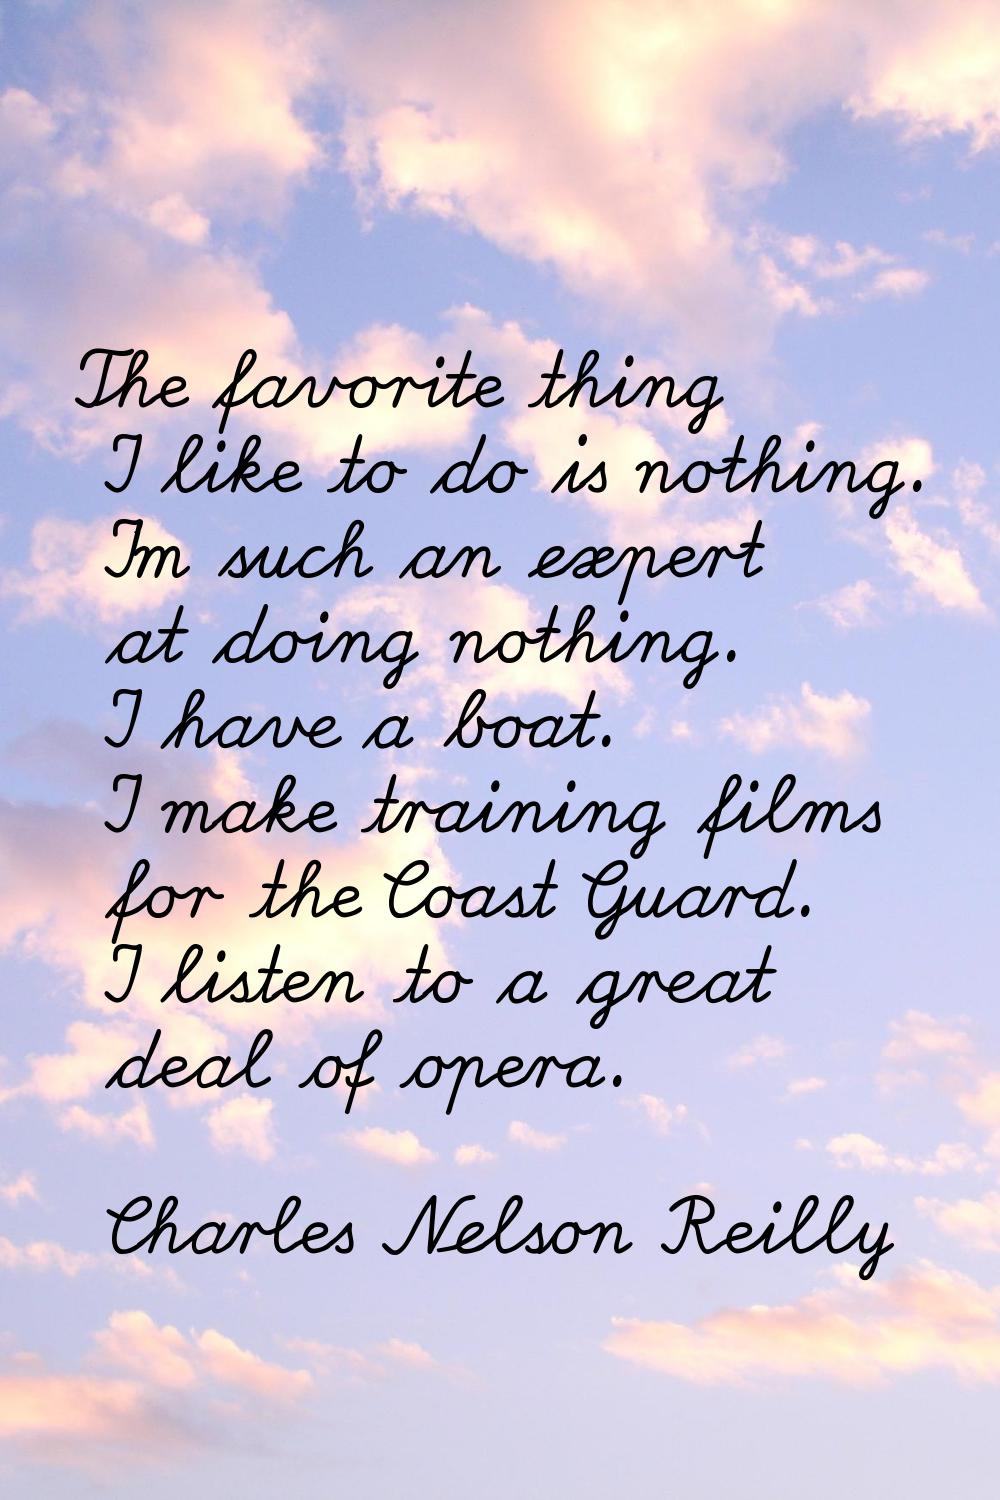 The favorite thing I like to do is nothing. I'm such an expert at doing nothing. I have a boat. I m